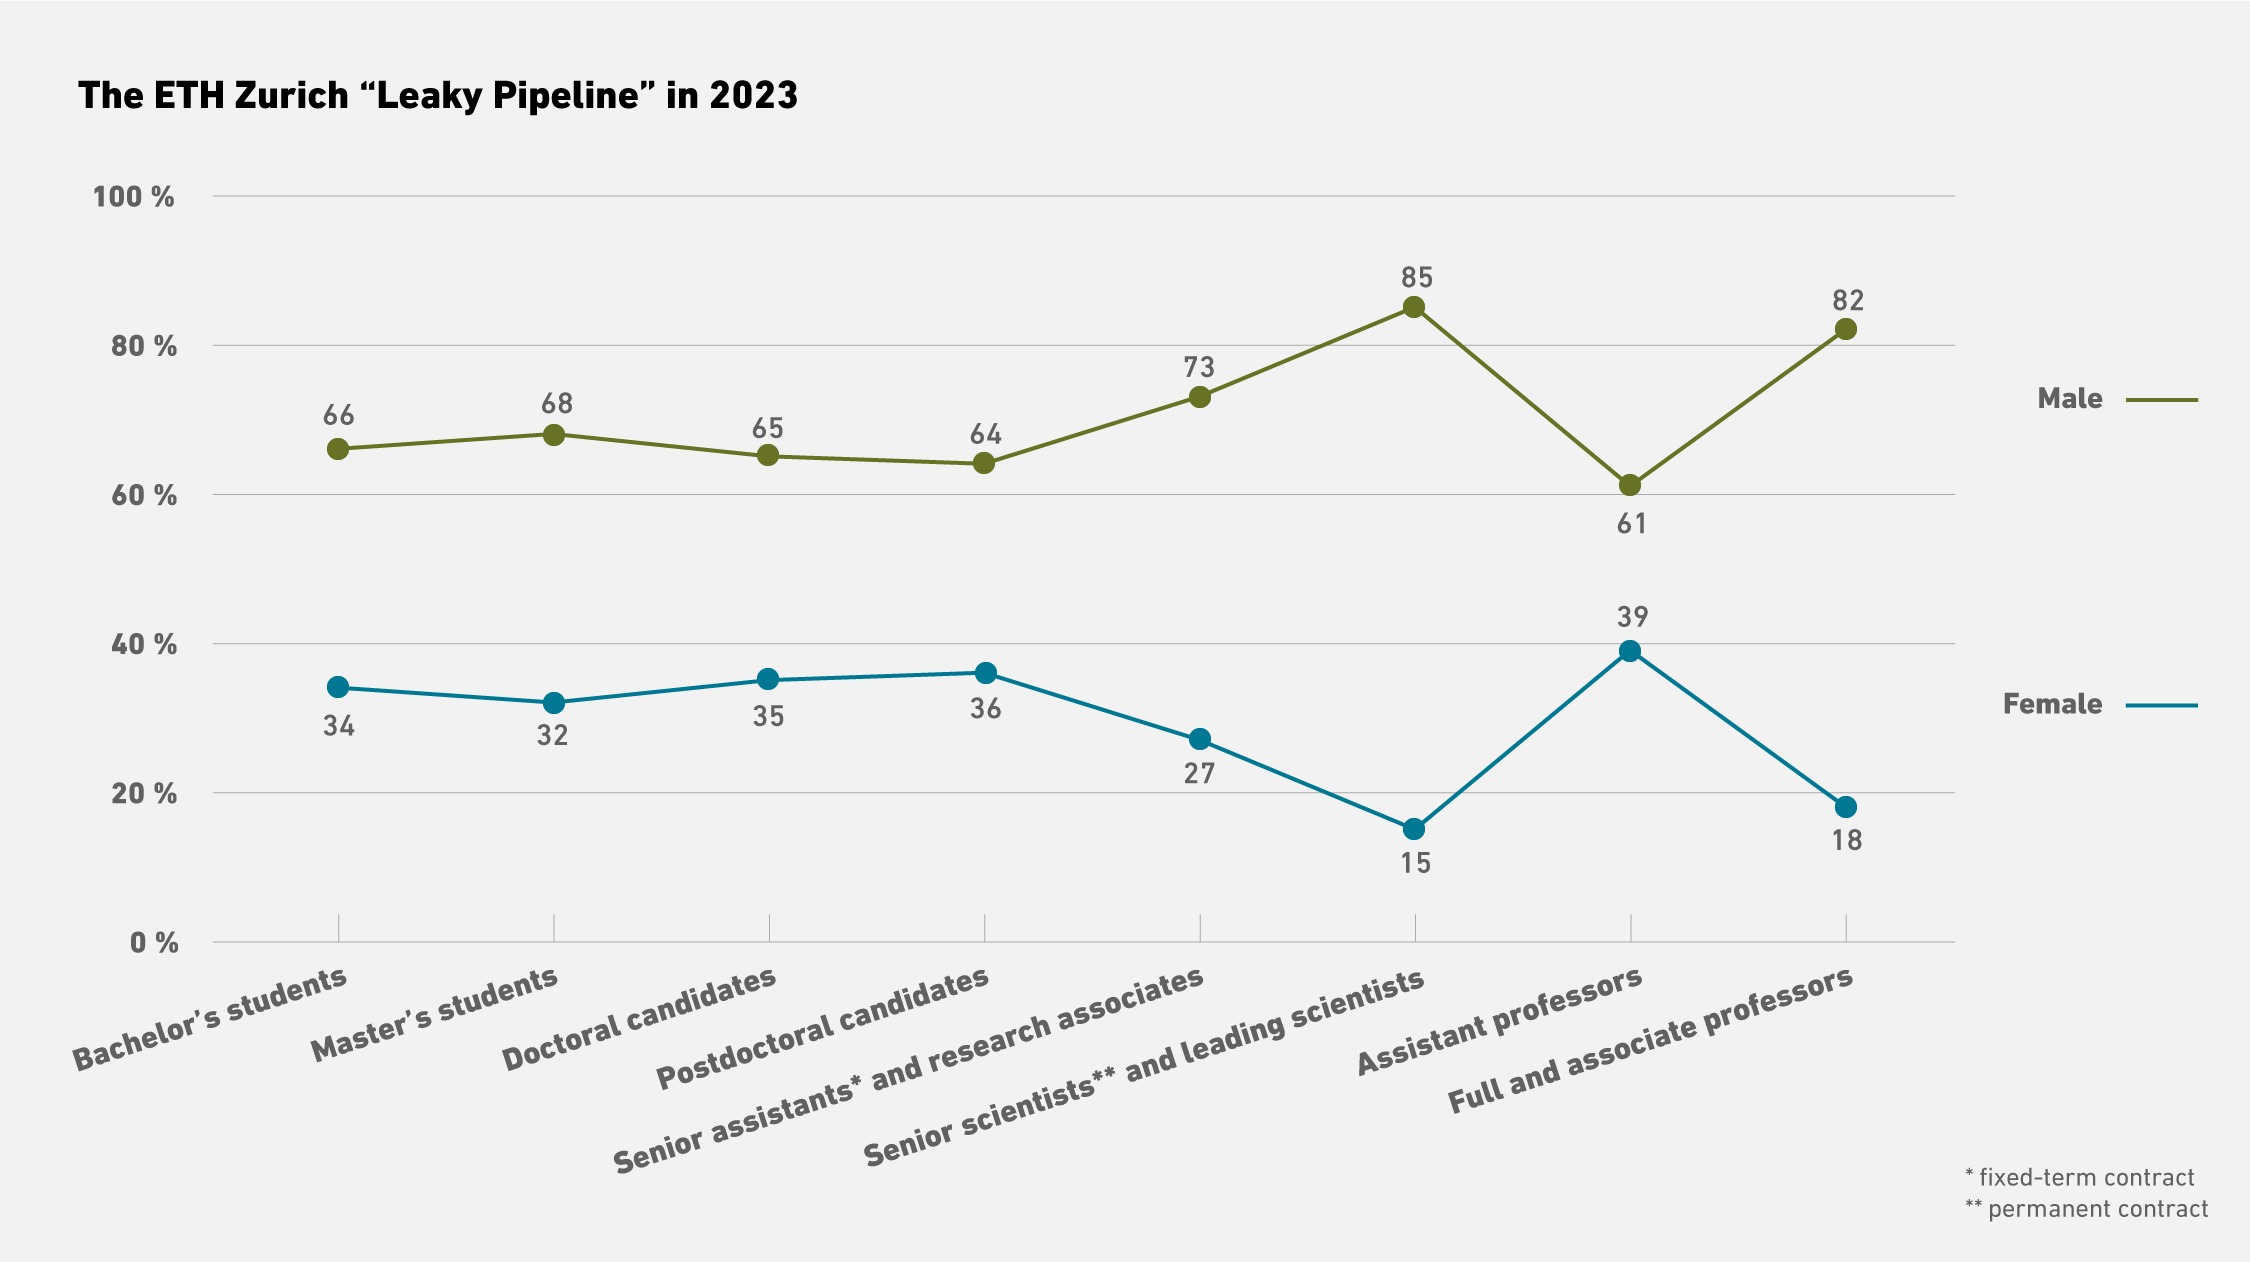 Enlarged view: Graph about the ETH Zurich "Leaky Pipeline" in 2023 with a differentiation between male and female